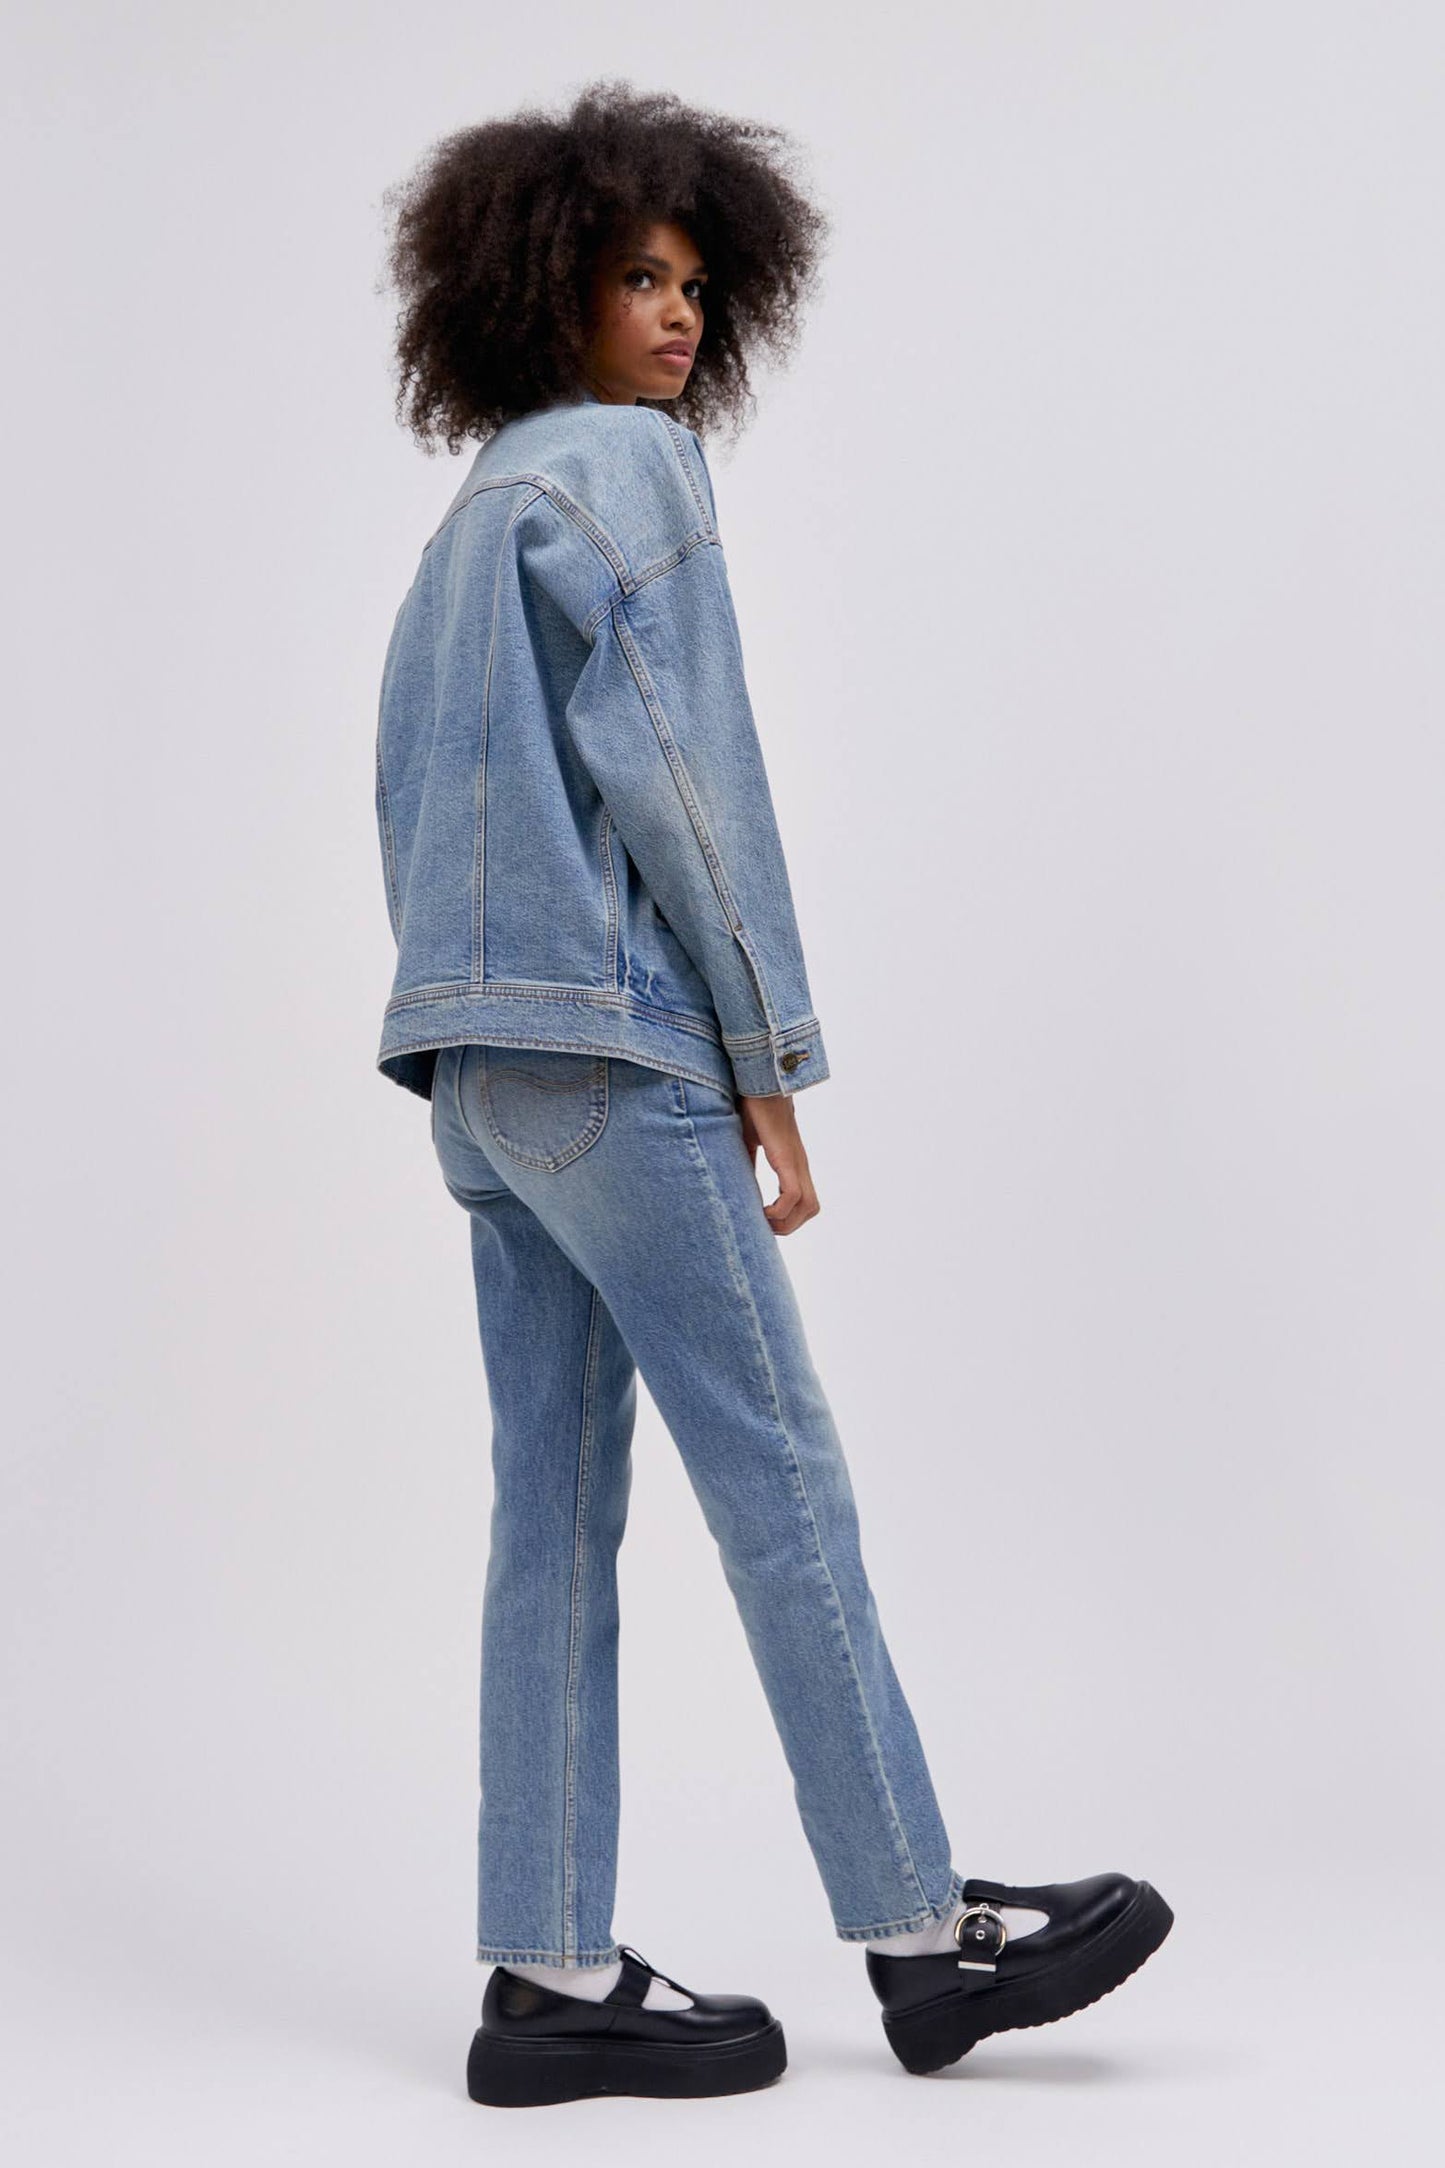 Backside posing curly haired model wearing a reimagined Lee Denim rider jacket in an oversized fit.